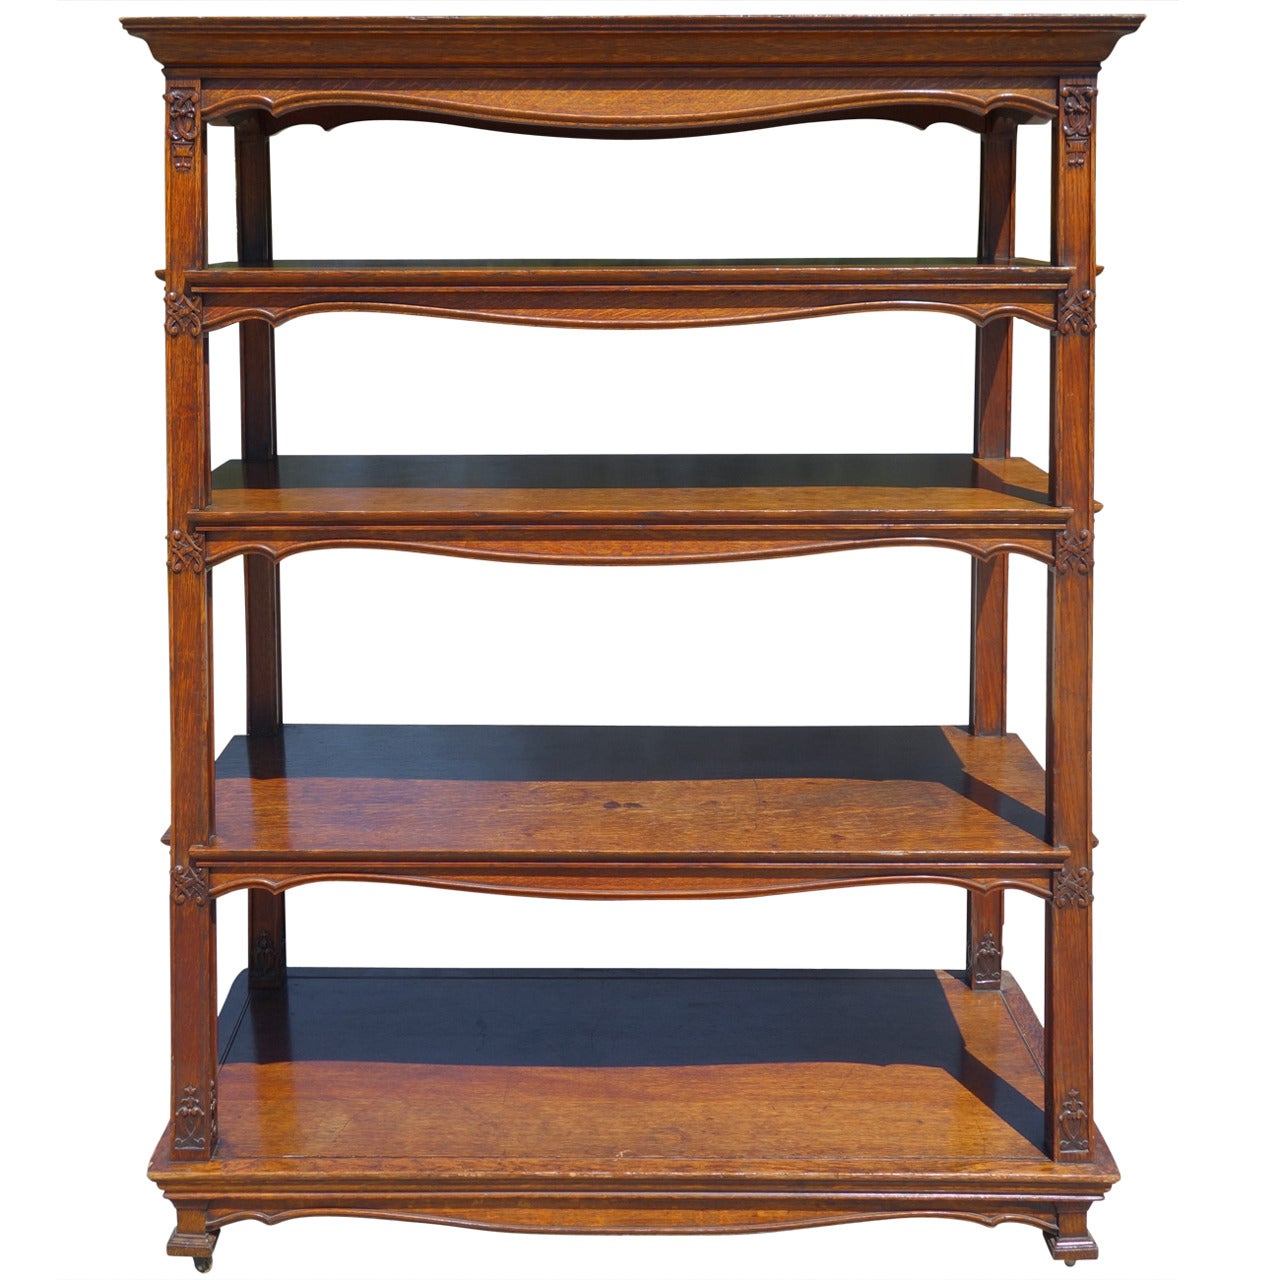 English Bookcase from the Ariadne Getty Collection